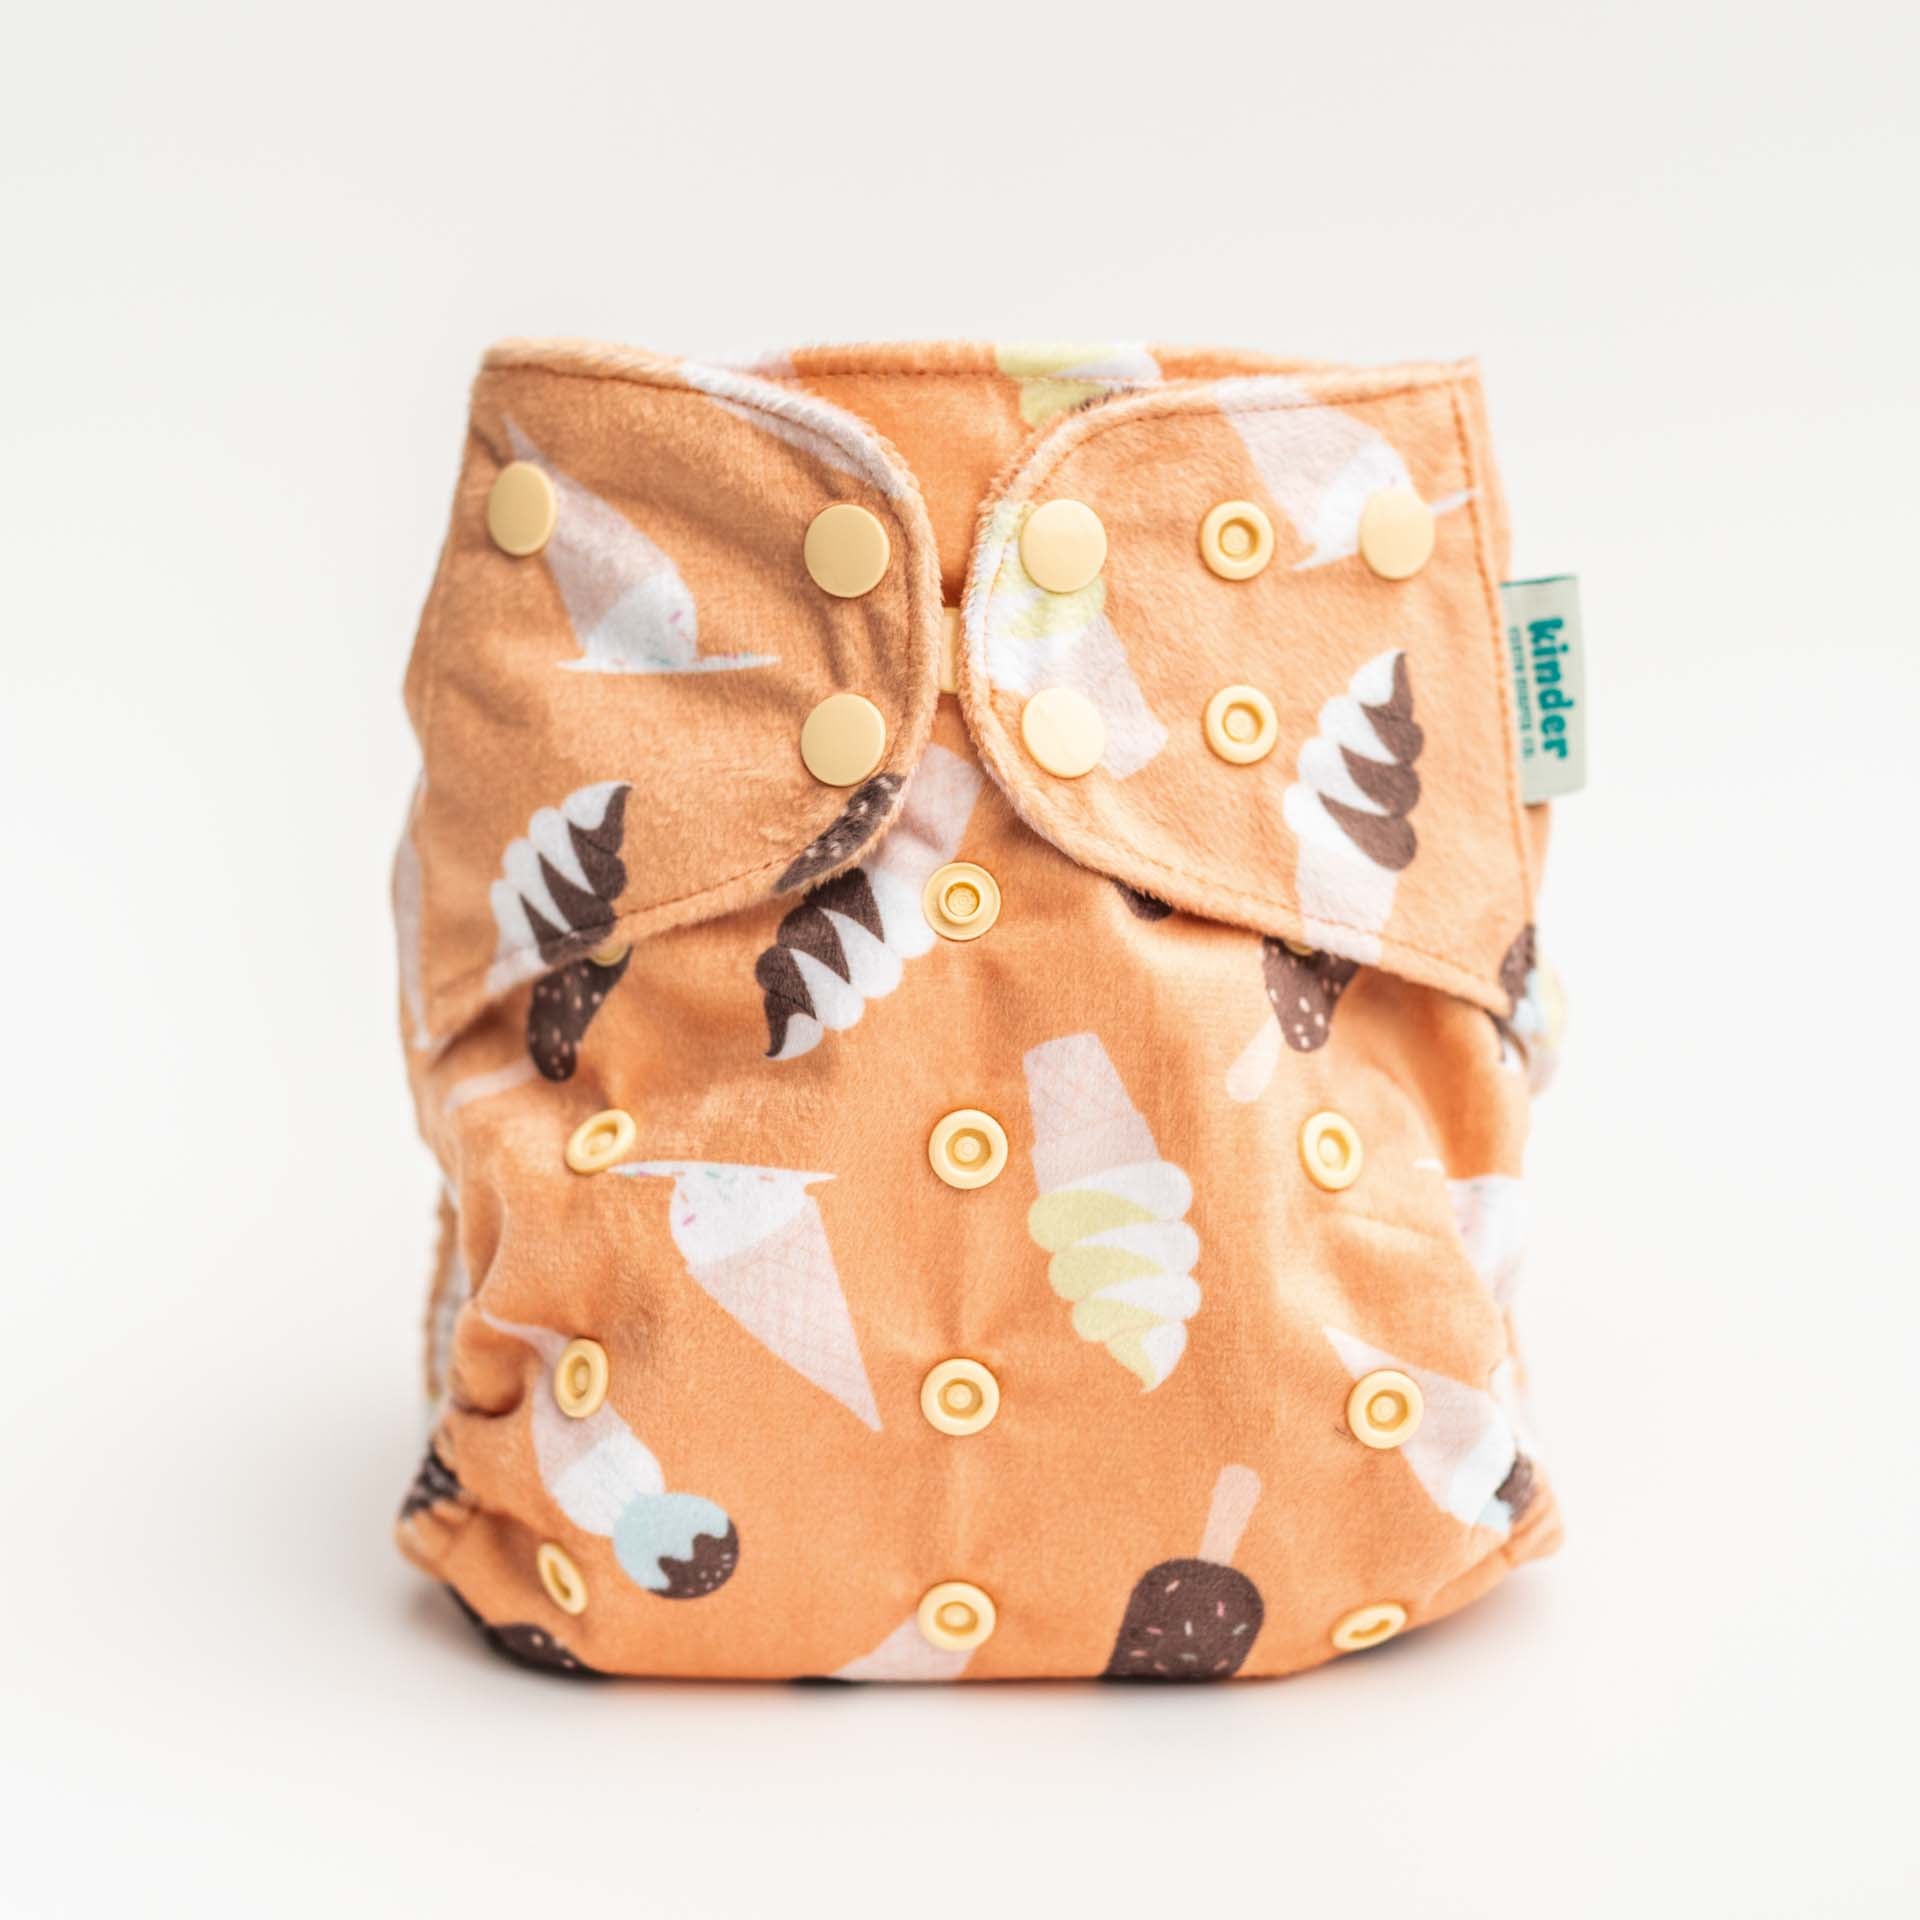 Basics Lounger Pocket Cloth Diaper — Minky Fleece with Athletic Wicking Jersey